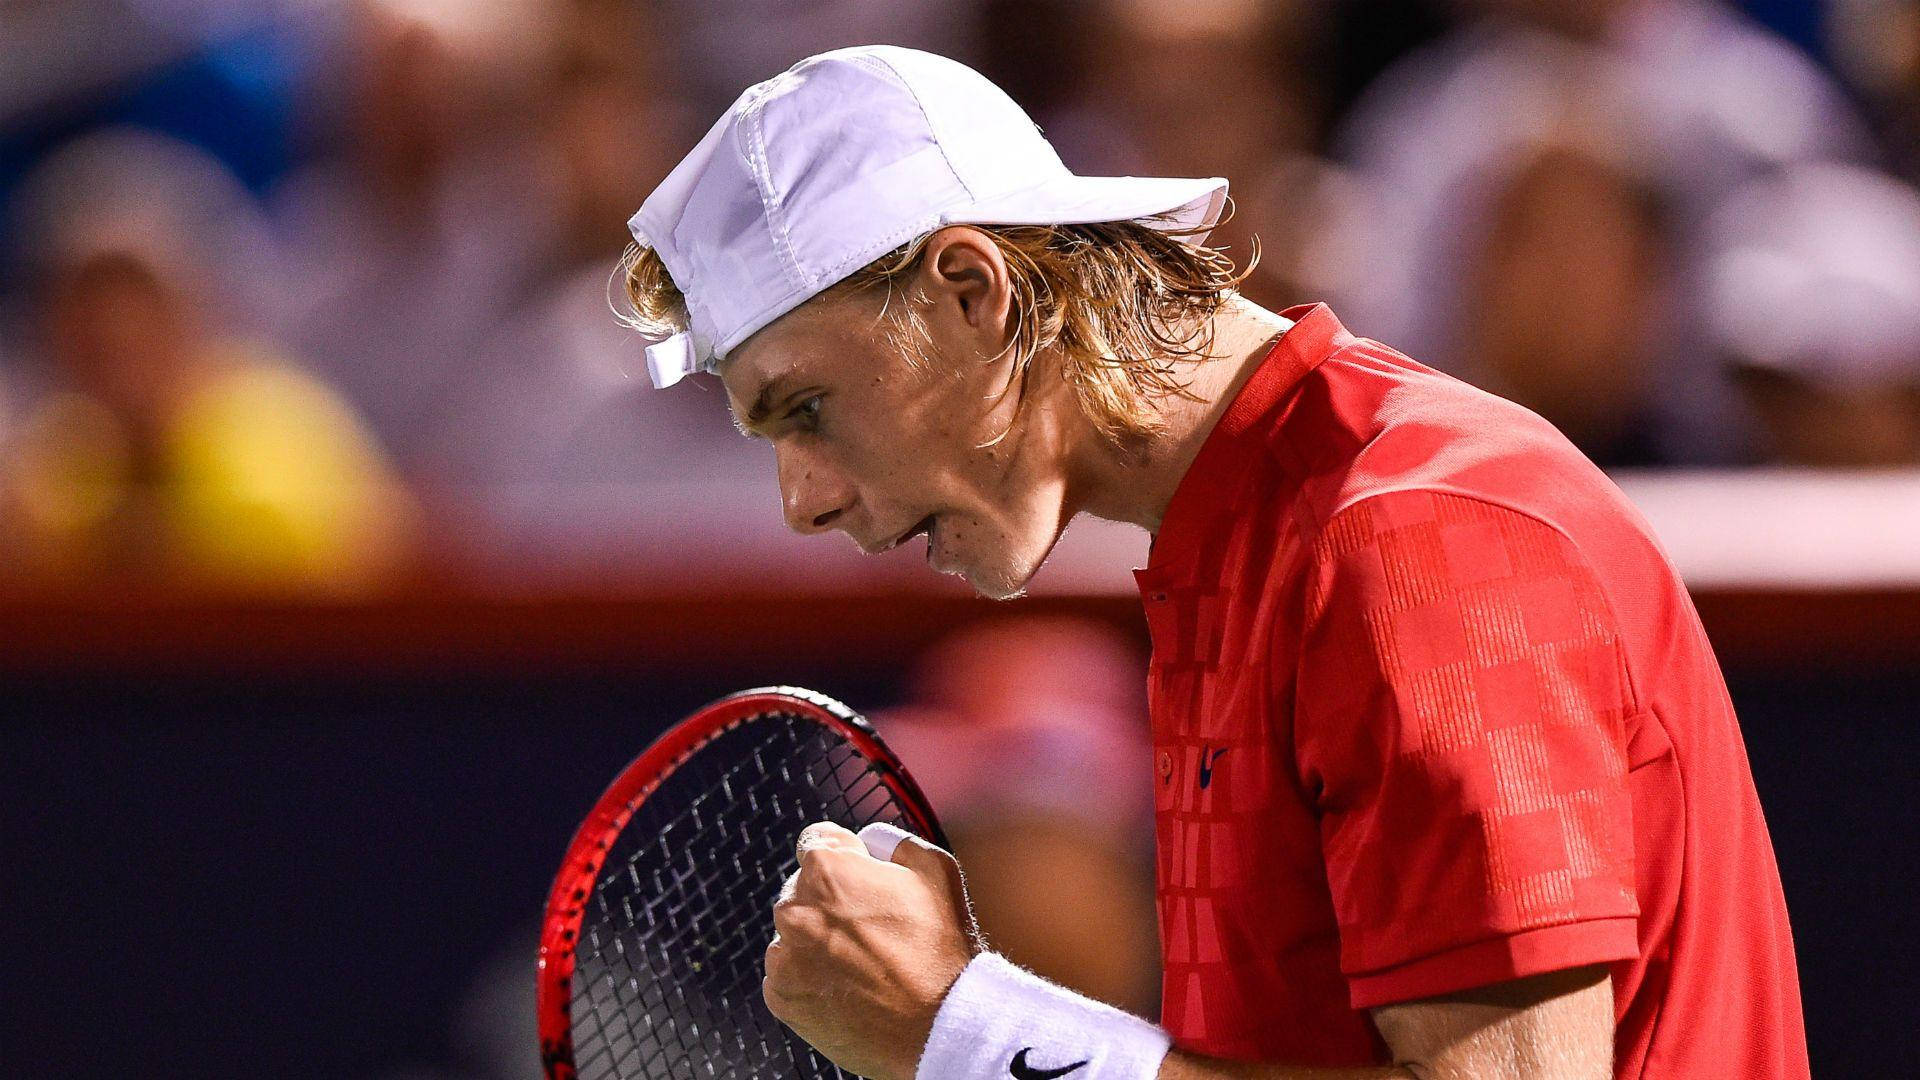 Acclaimed Tennis Athlete Denis Shapovalov In Mid-match Action